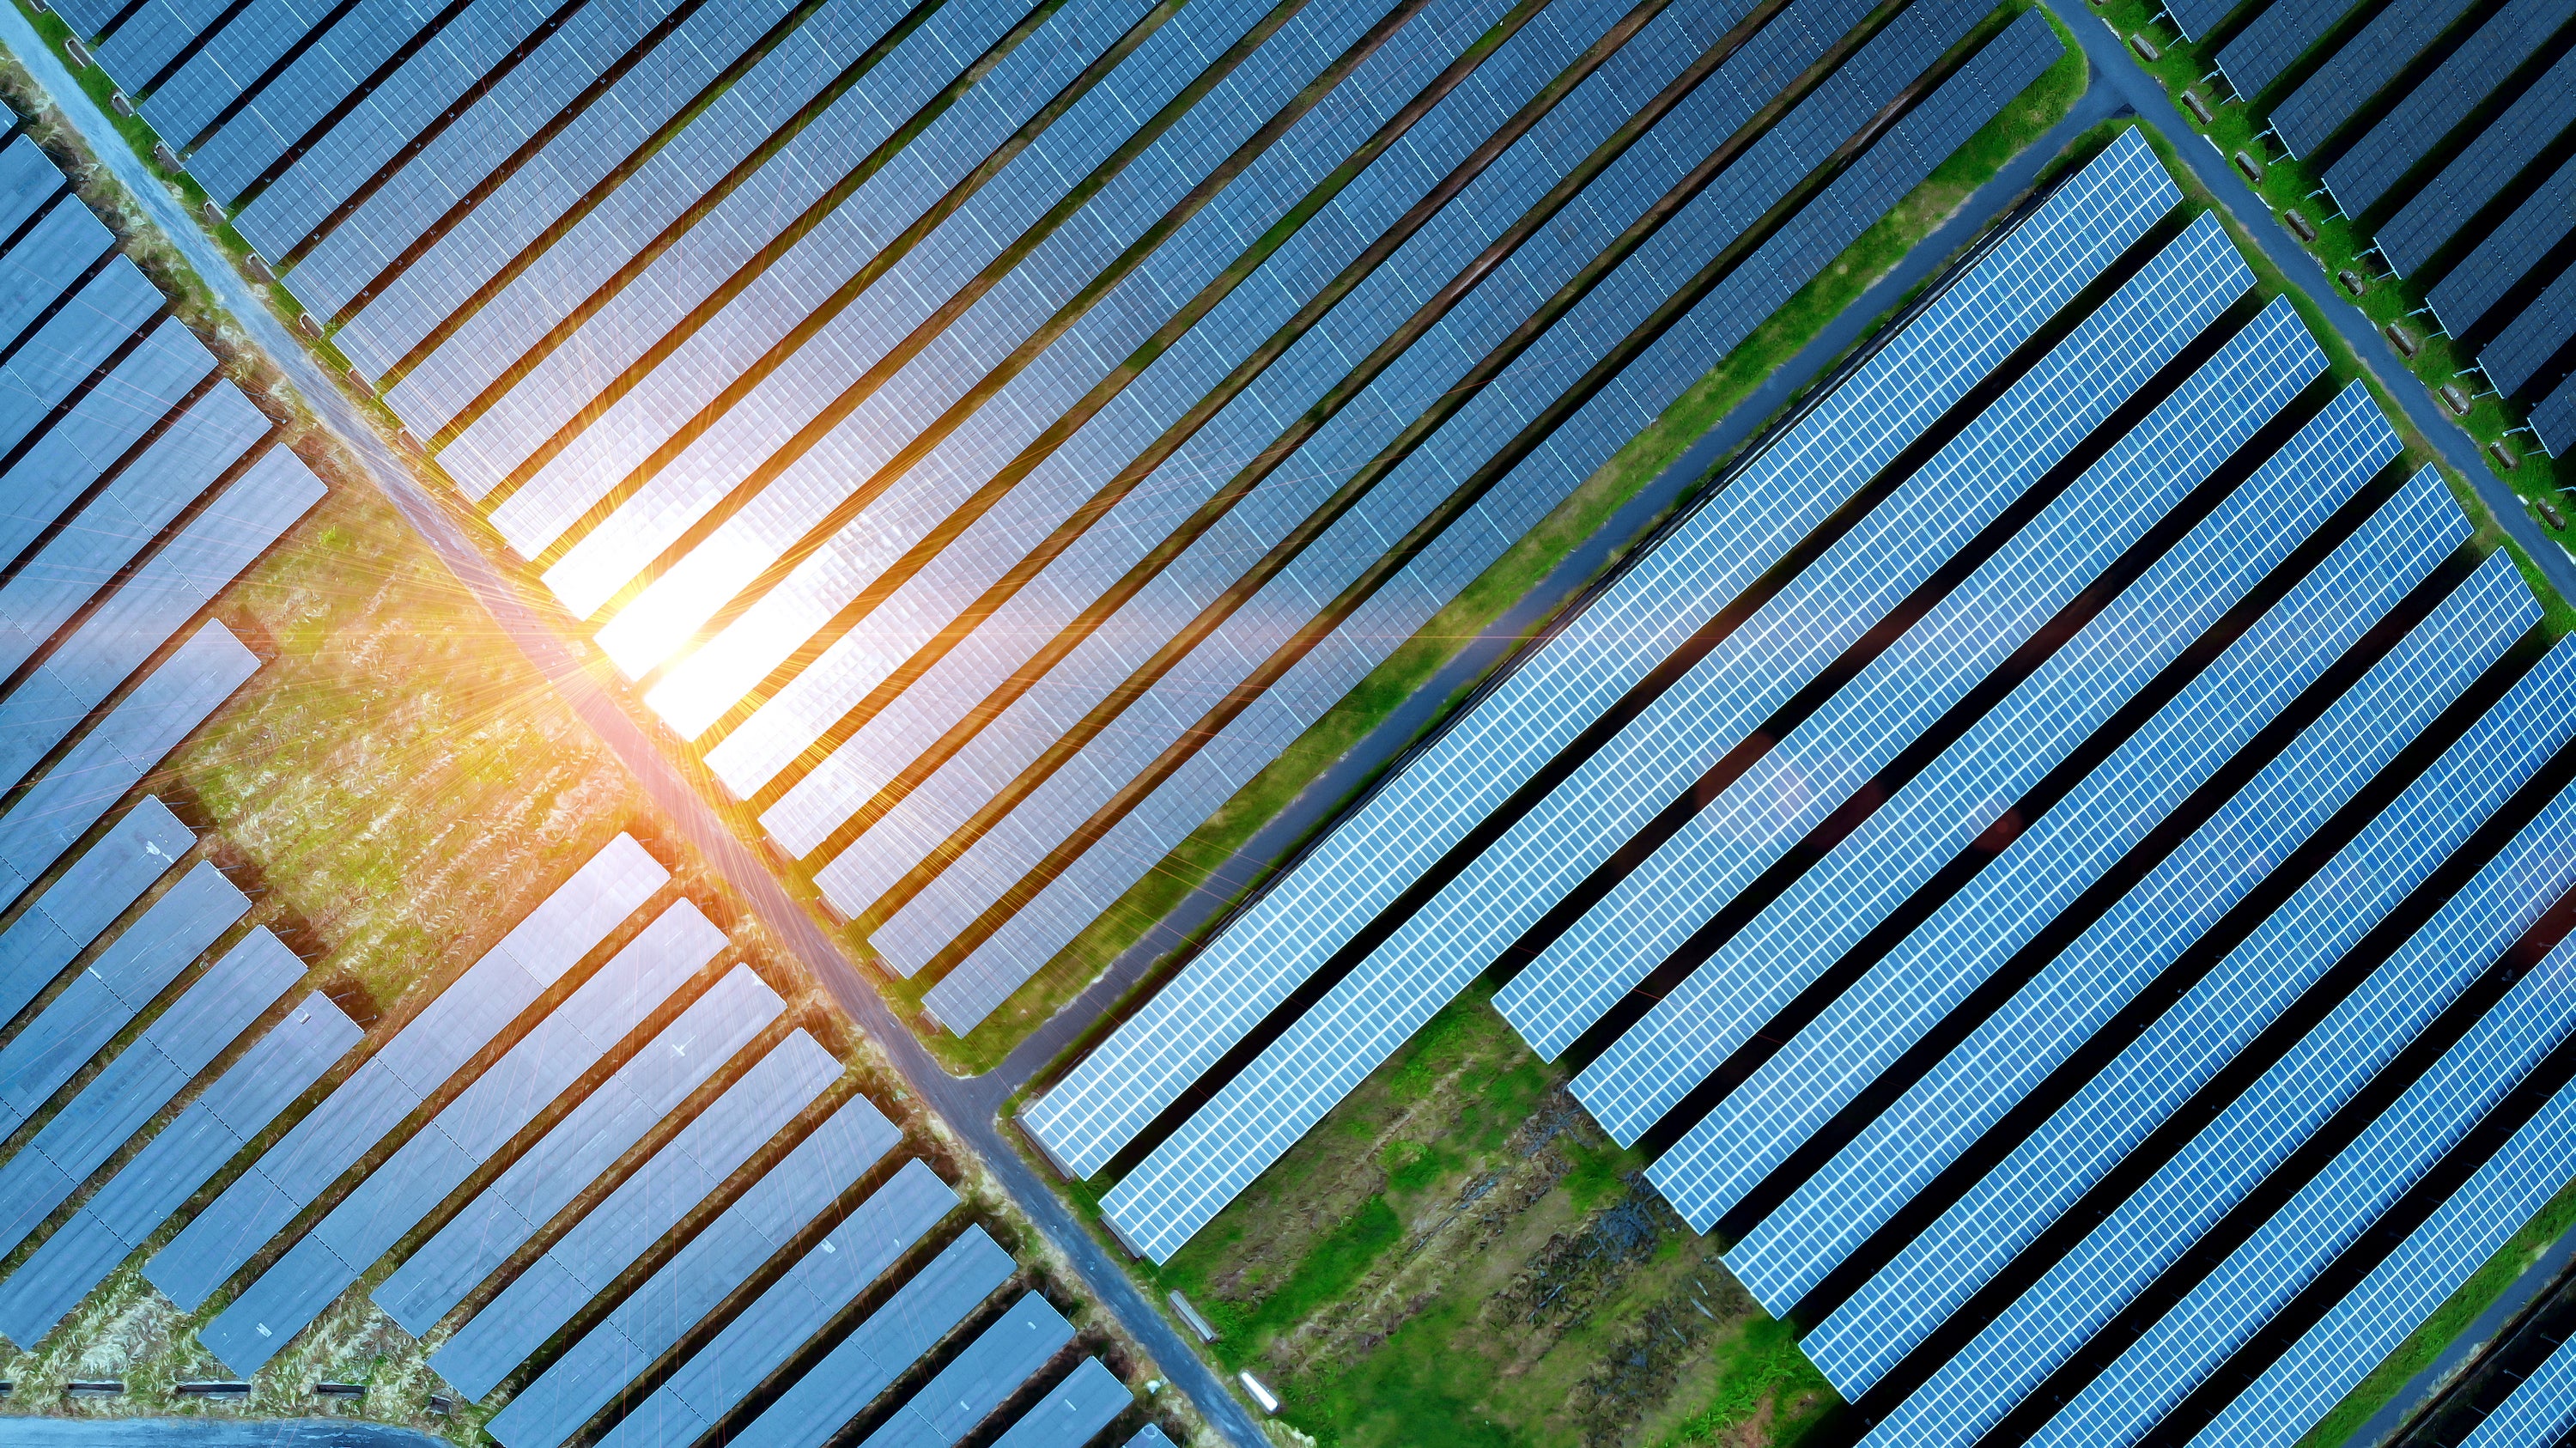 Aerial view of solar cell field